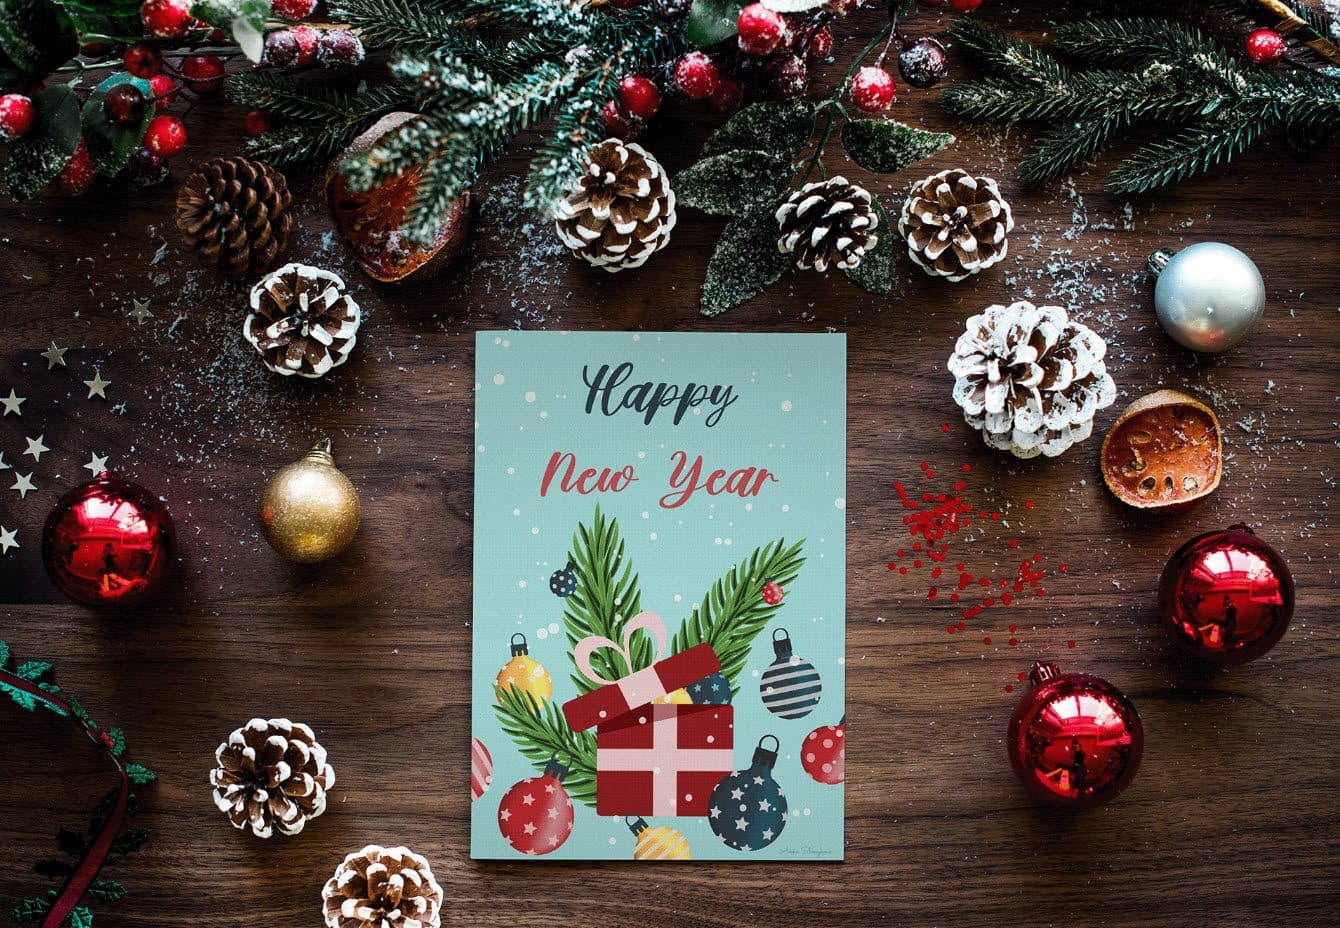 Christmas card on a wooden desk surrounded with ornaments, pinecones and branches.